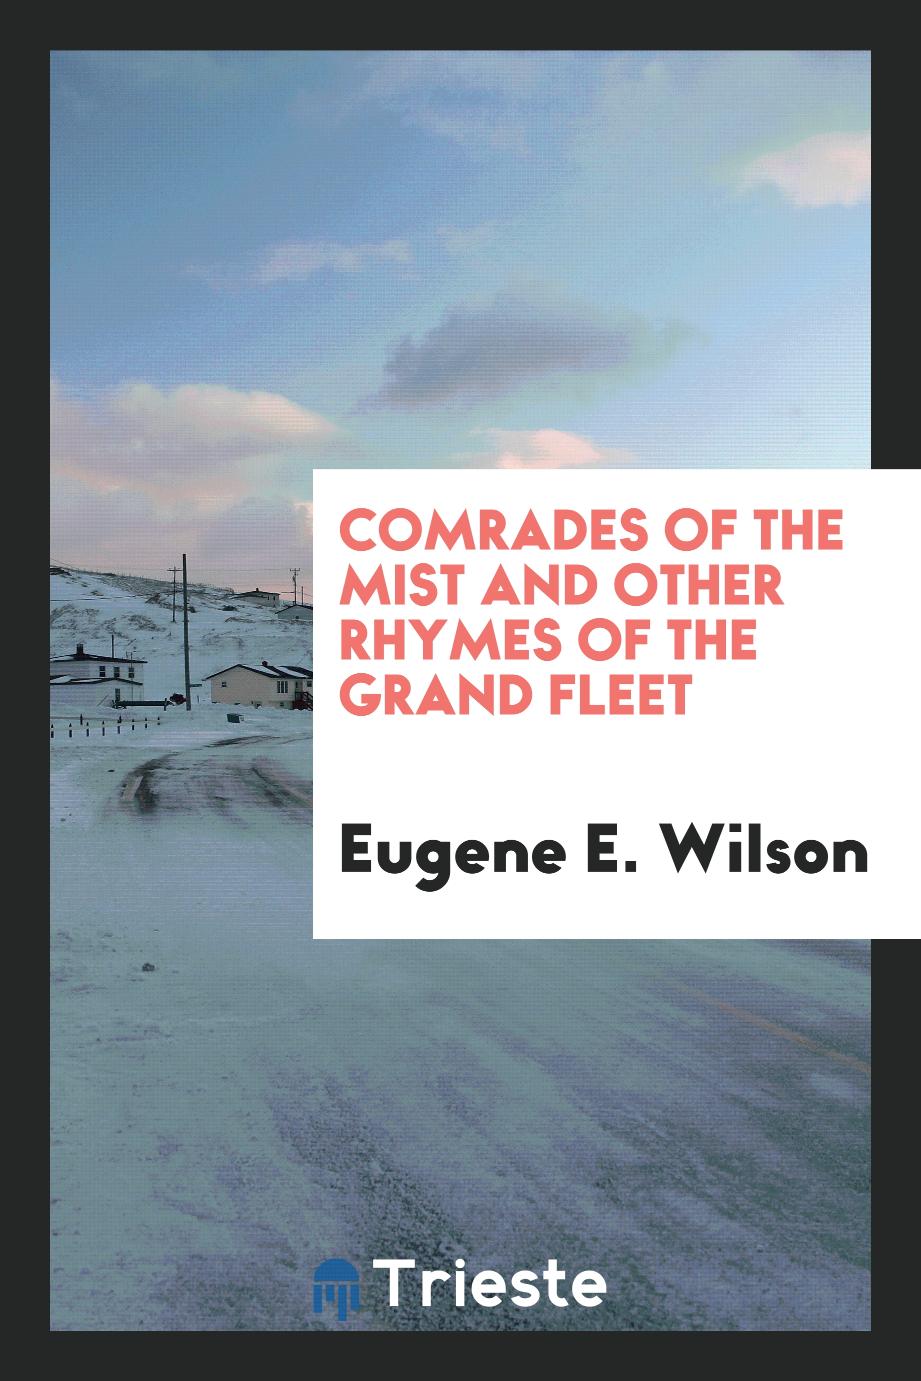 Comrades of the Mist and Other Rhymes of the Grand Fleet